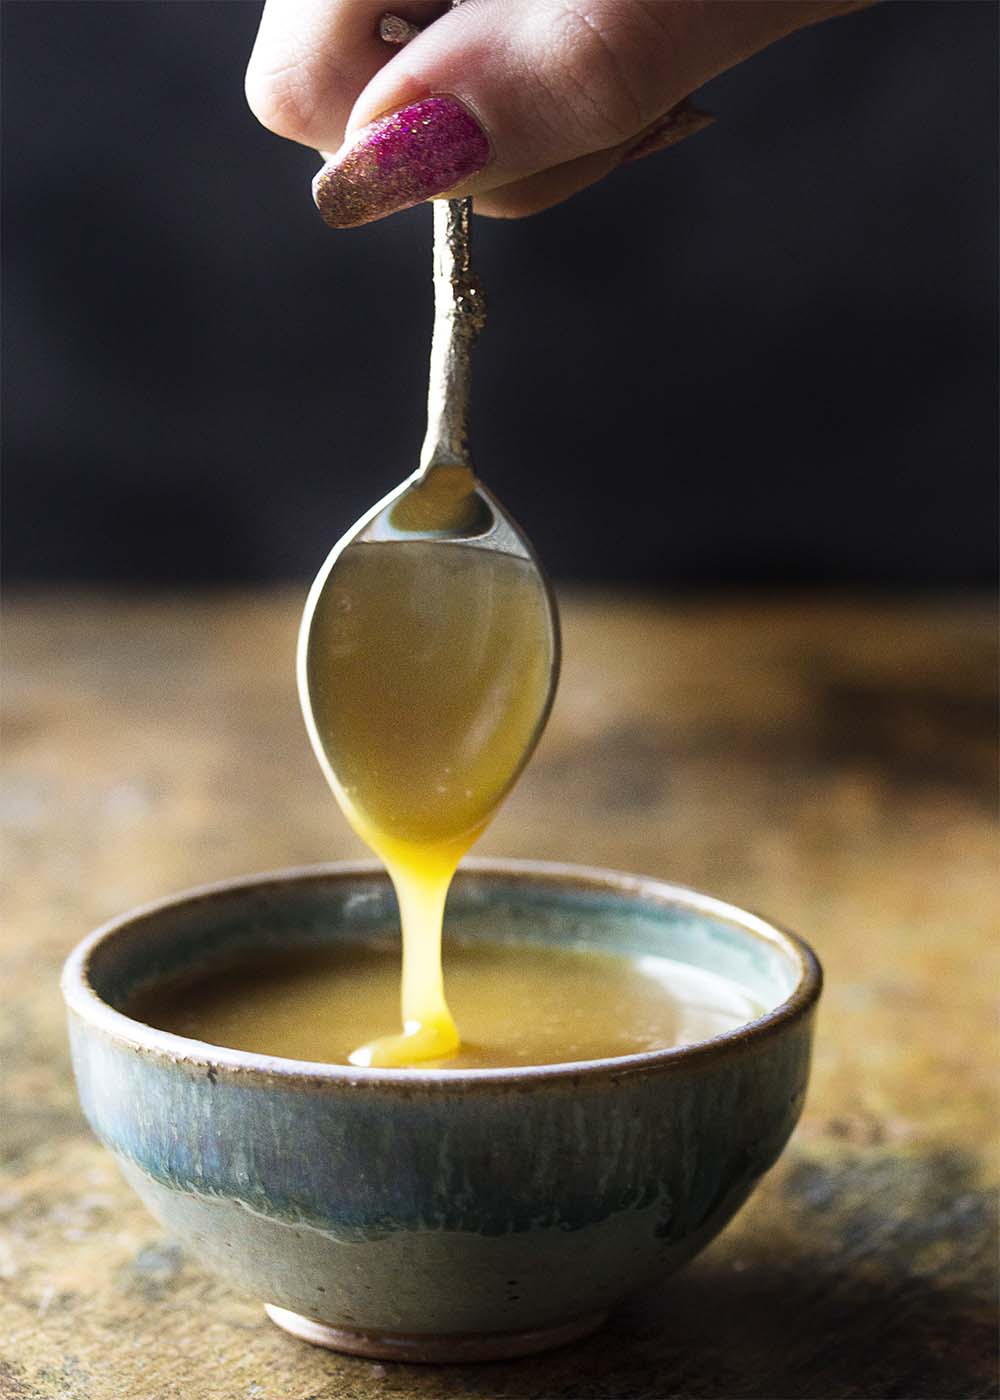 A hand holding a spoon of butterscotch sauce so that the sauce pours into a bowl.